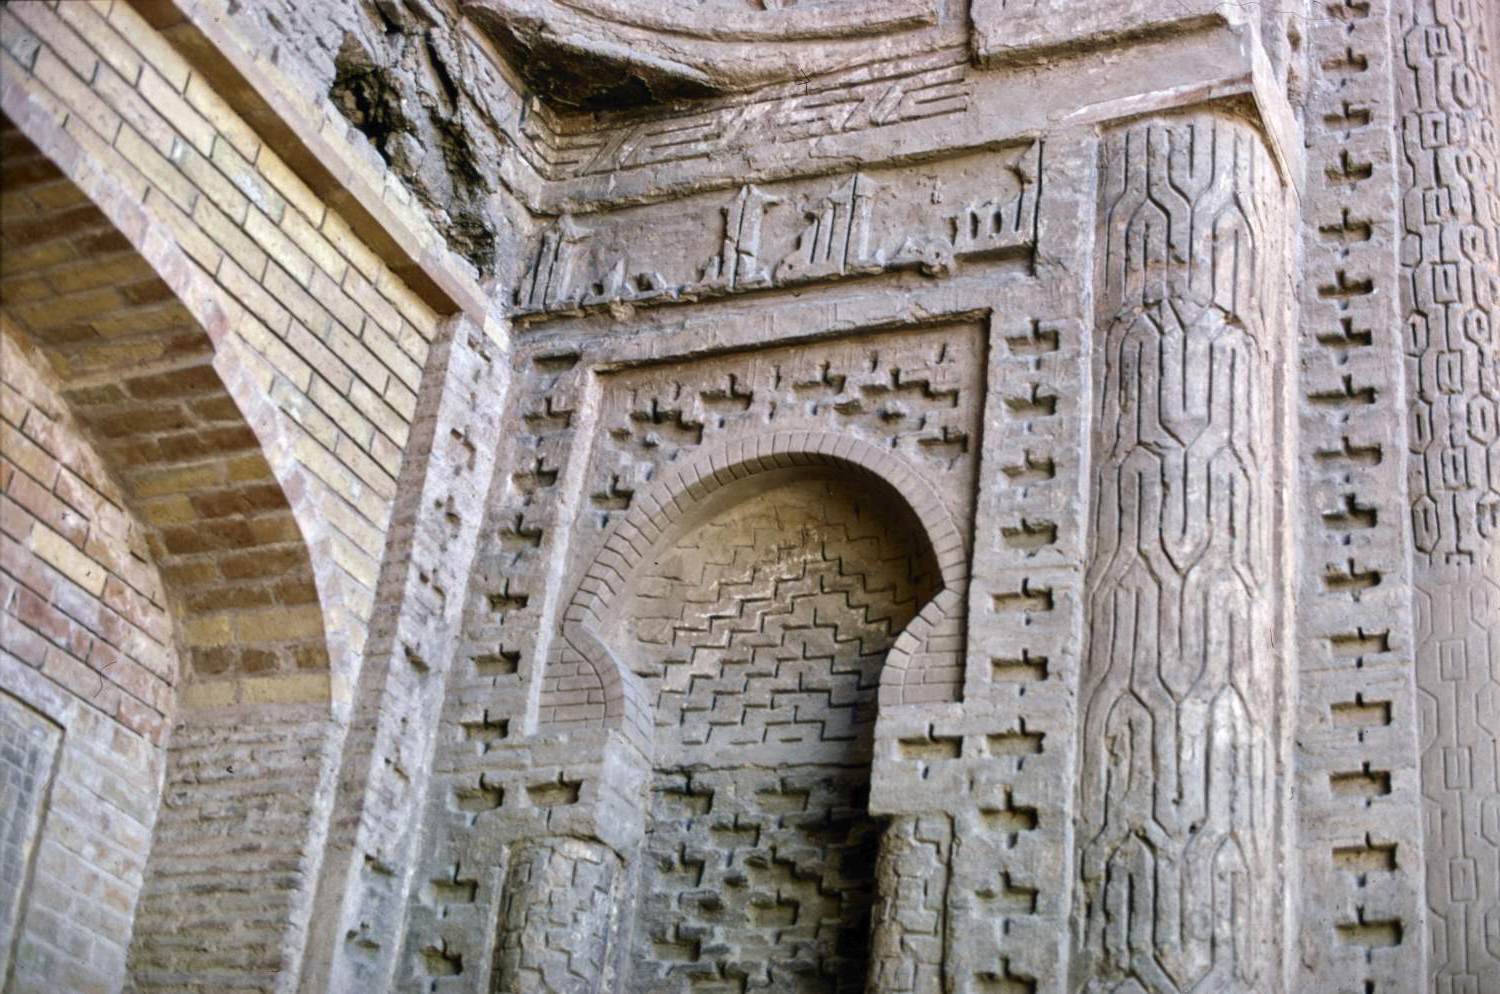 Masjid-i Jurjir - Detail of facade showing blind niche and kufic inscription band below semi-dome, right side.